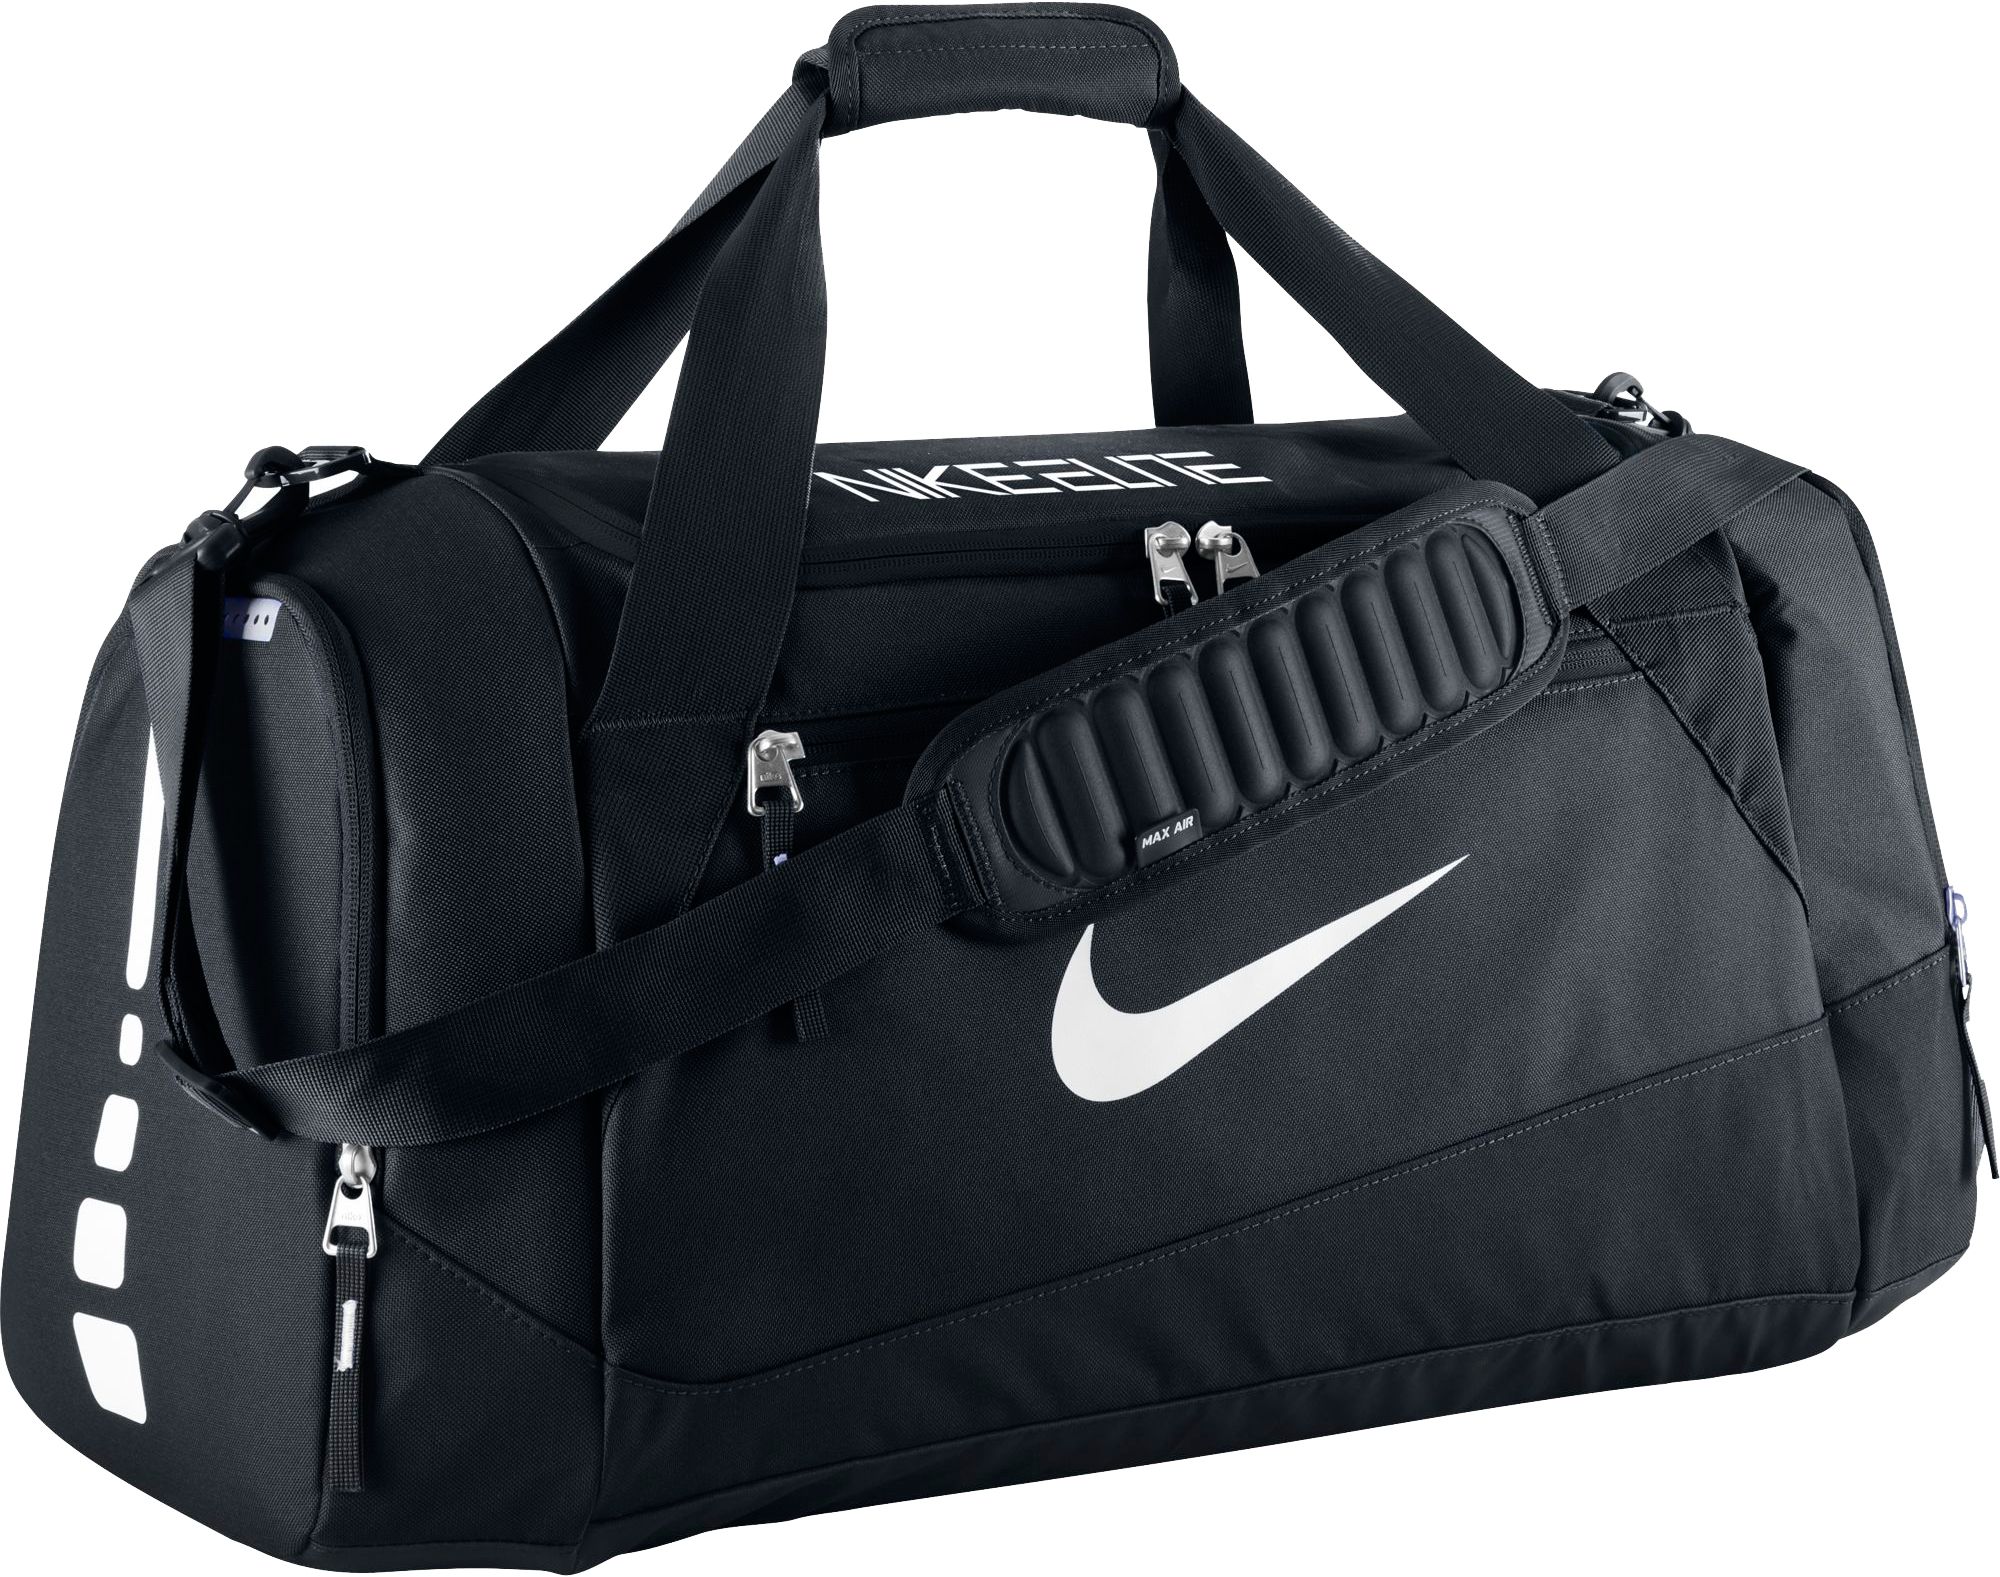 How to Be Wise in Choosing Sports Duffel Bags For You